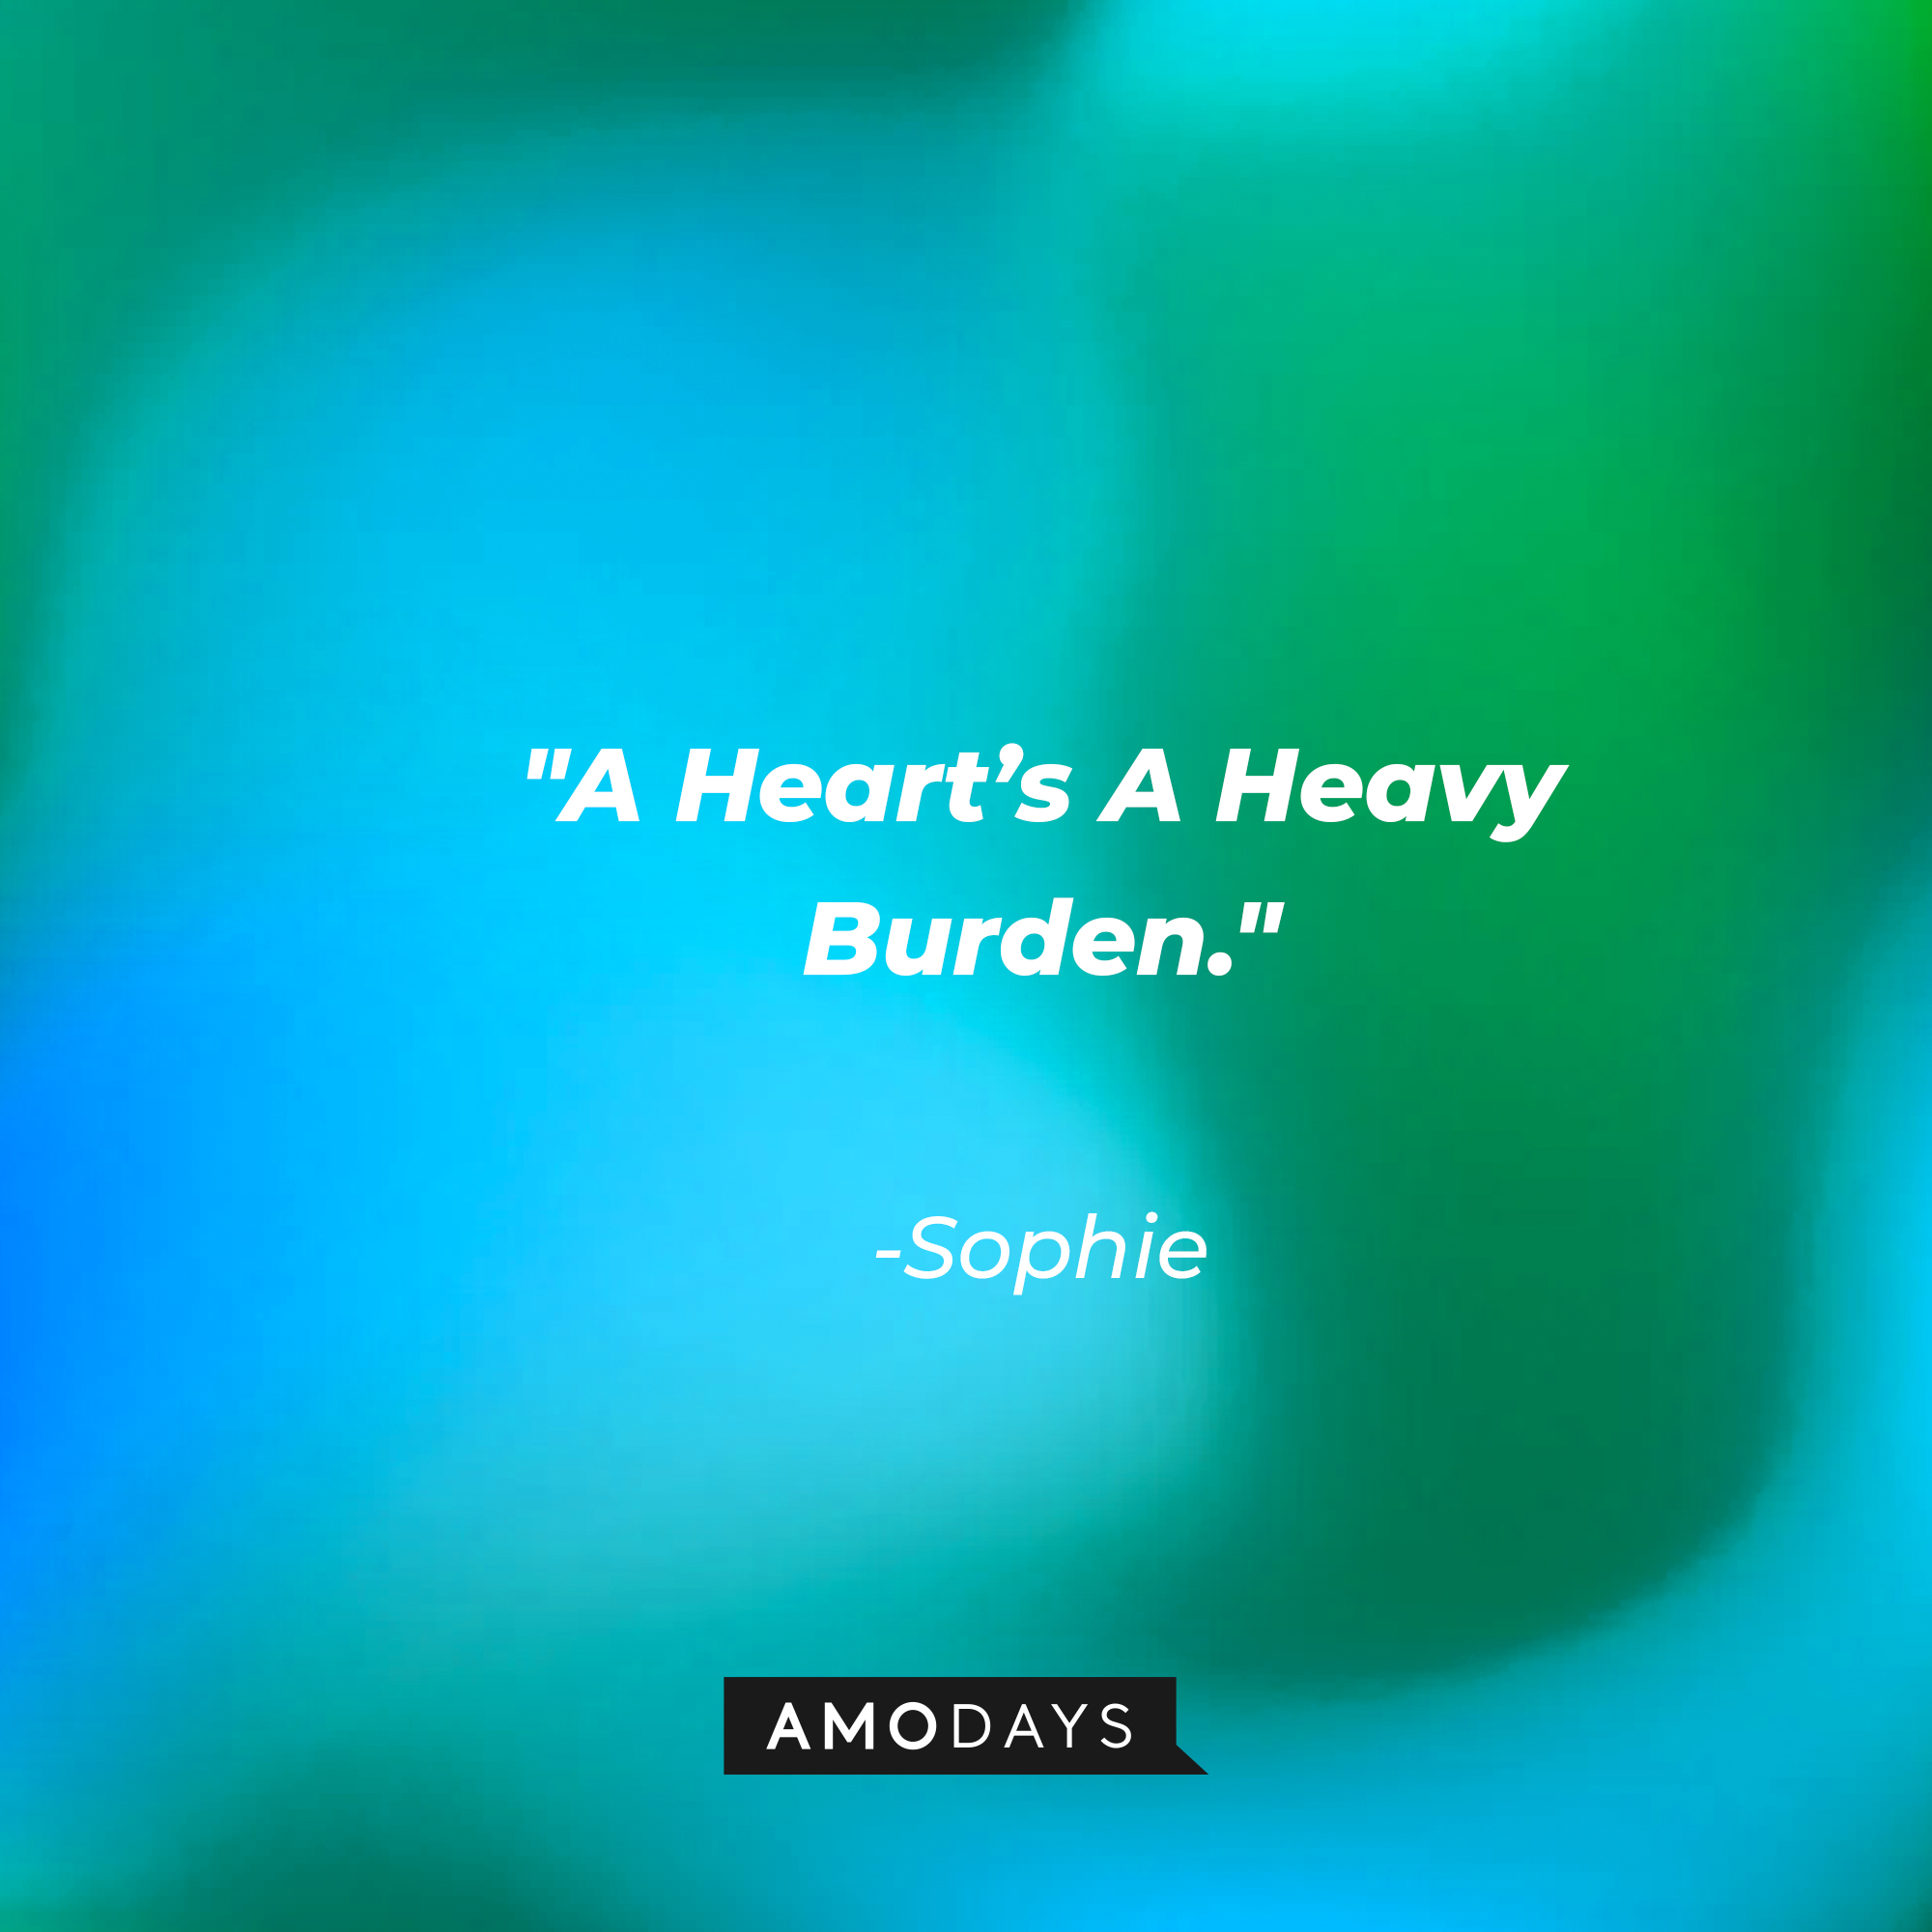 Sophie's quote: "A Heart's A Heavy Burden." | Source: Amodays